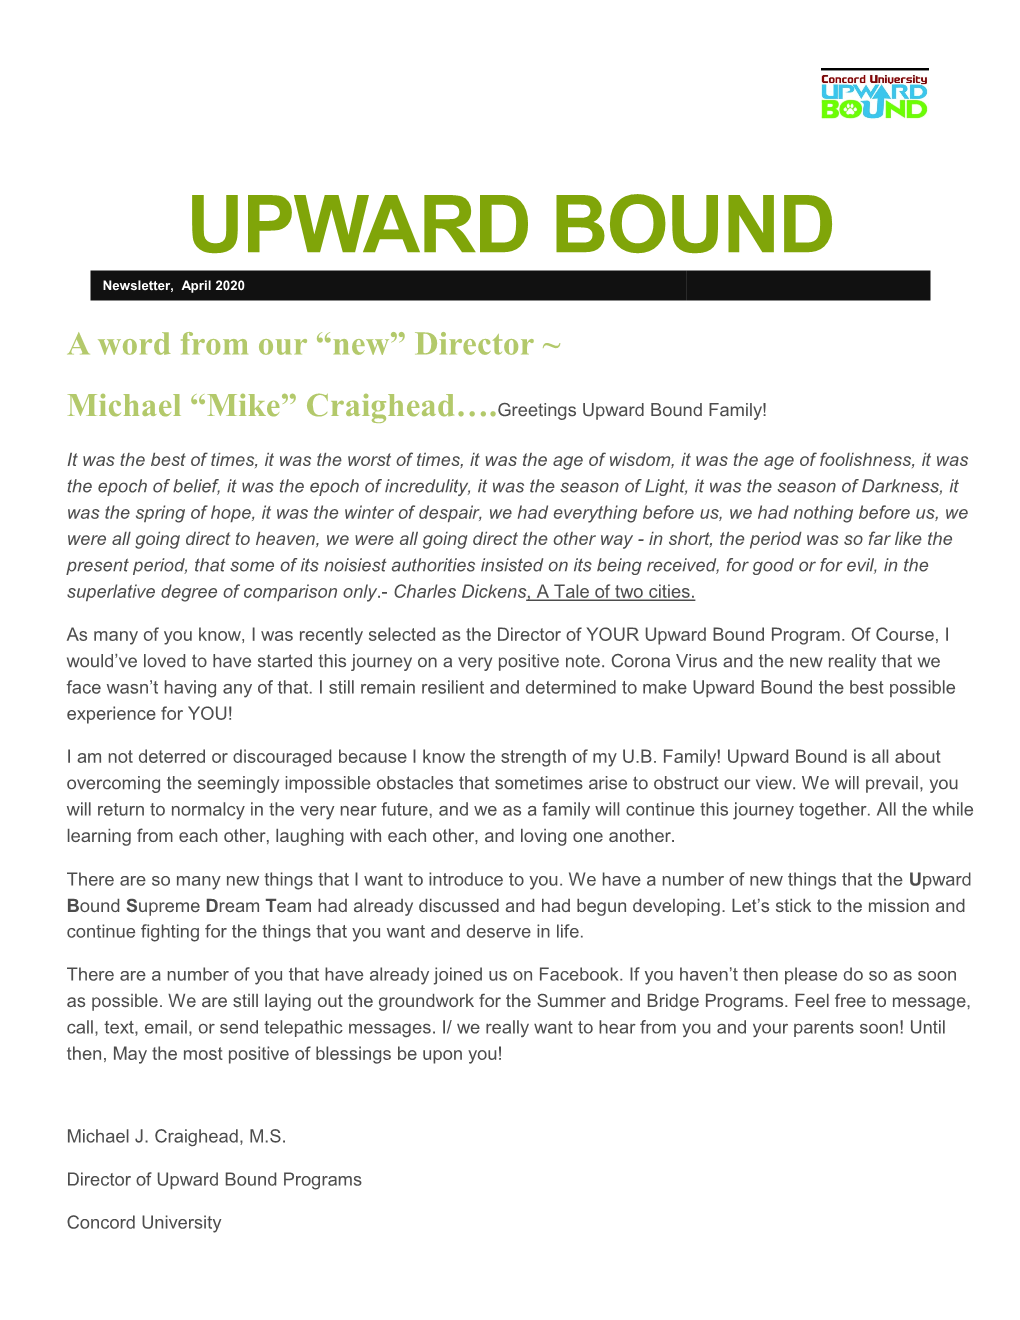 UPWARD BOUND Newsletter, April 2020 a Word from Our “New” Director ~